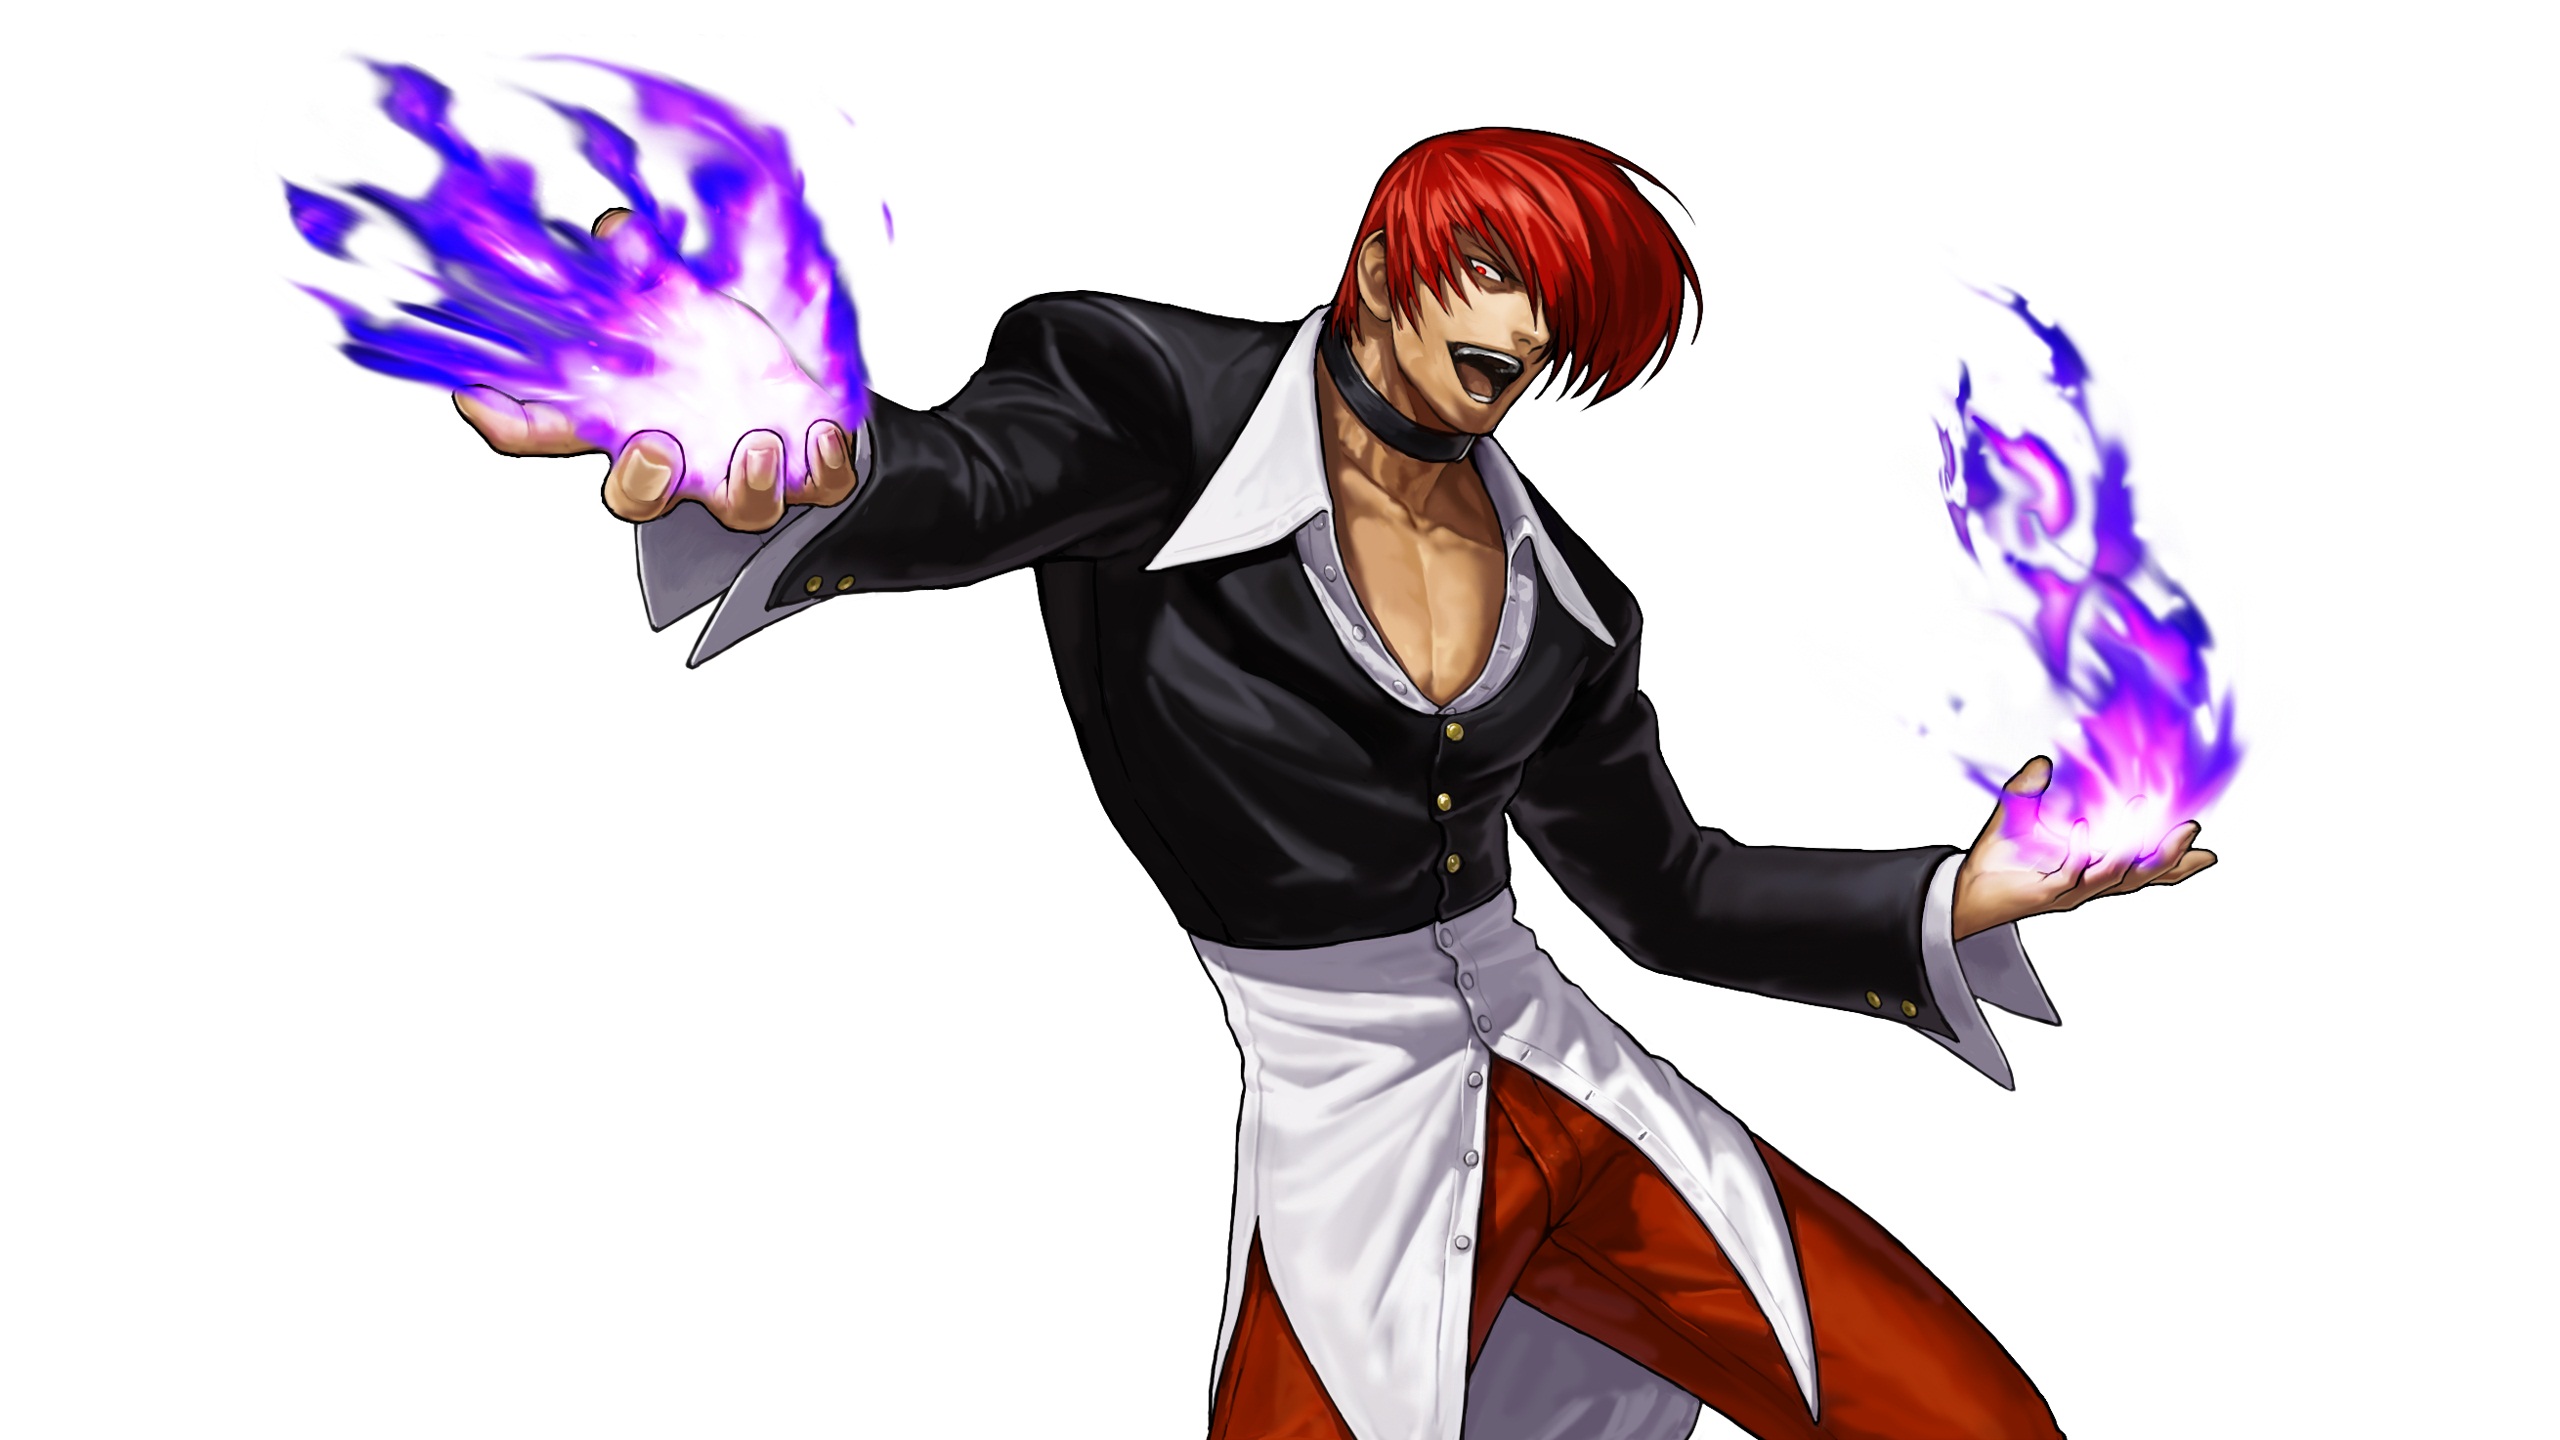 Iori Yagami Backgrounds, Compatible - PC, Mobile, Gadgets| 2560x1440 px